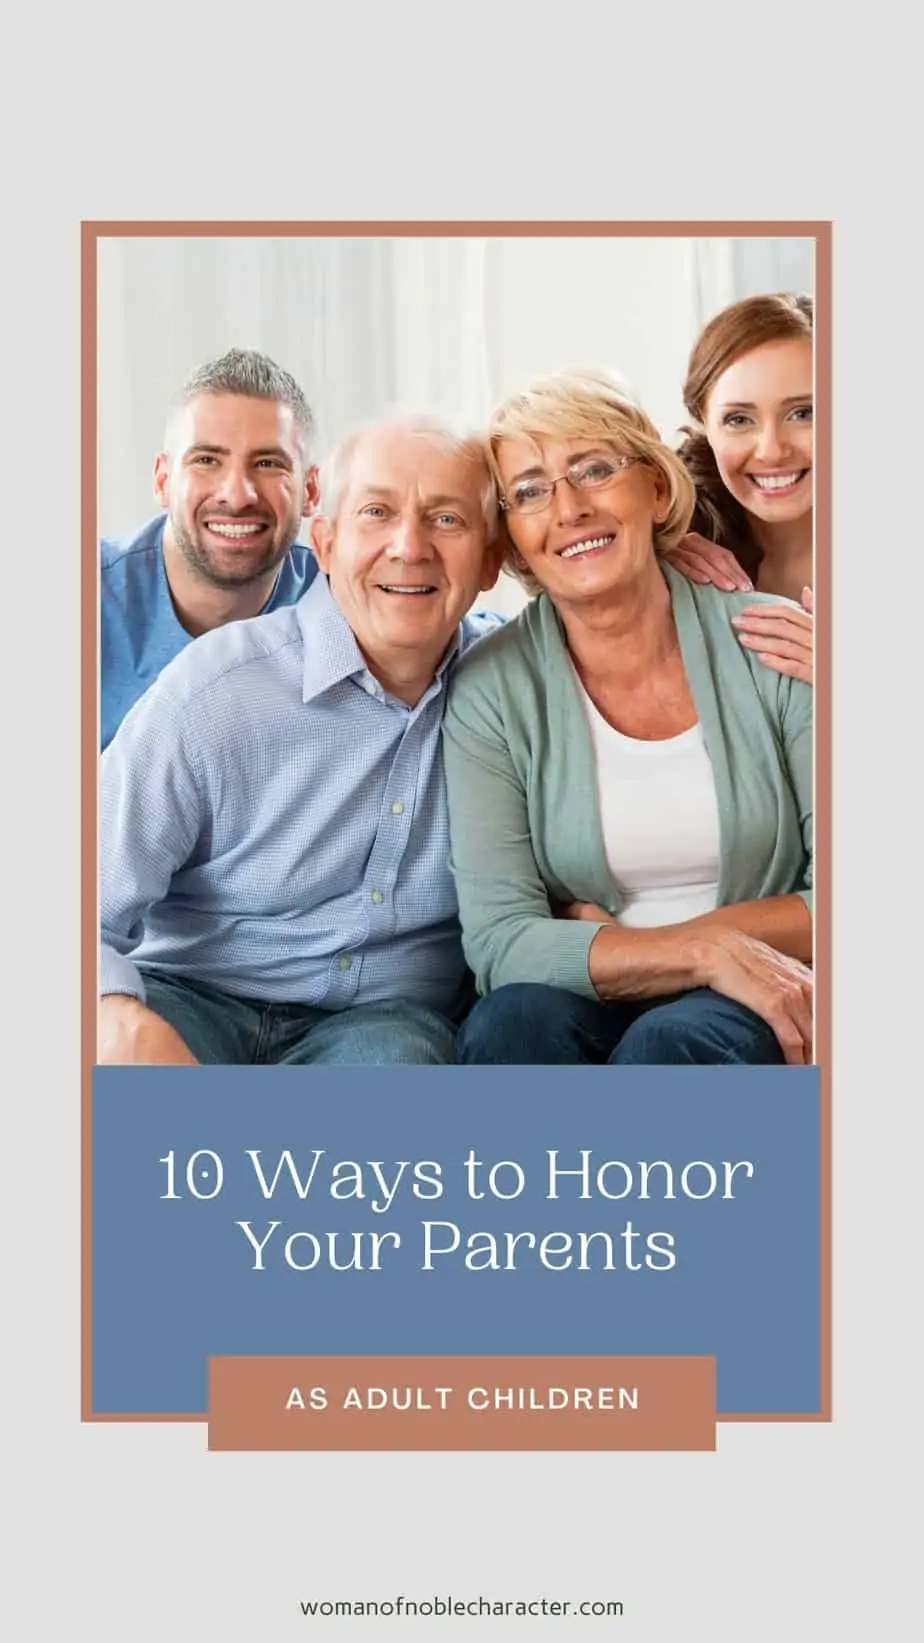 image of senior parents with adult children with text 10 Ways to Honor Your Parents as Adult Children